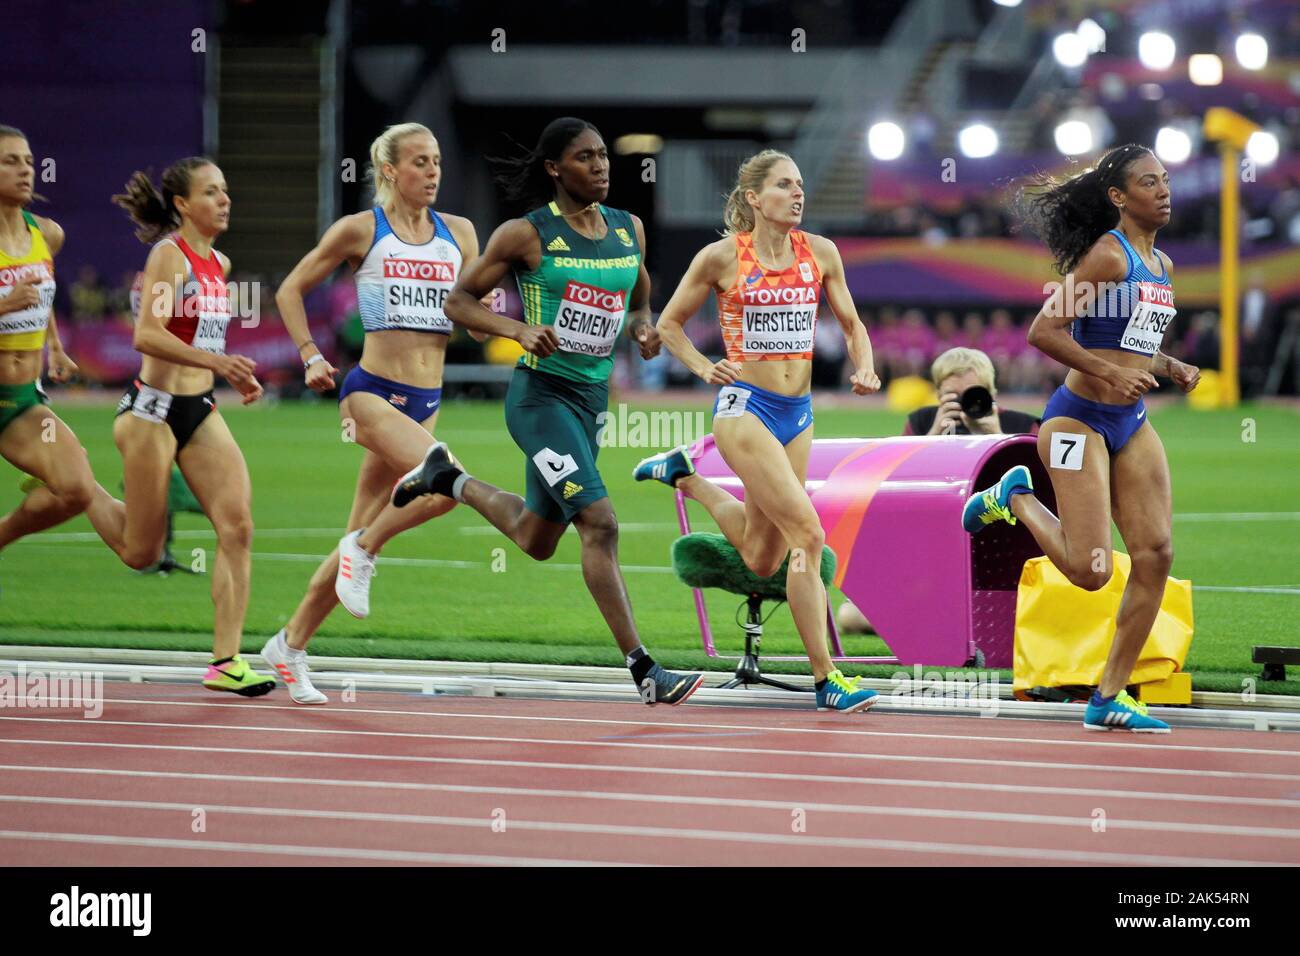 Lynsey Sharp (Great Britain ) , Charlene Lipsey (USA) , Caster Semenya (Afrique du Sud),Selina Büchel (Suisse)  and Sanne Verstegen-Wolters (Nederlandt) during the 2nd Semi Final 800 m women of the IAAF World Athletics Championships on August 6, 201 at the Olympic stadium in London, Great Britain Photo Laurent Lairys / DPPI Stock Photo